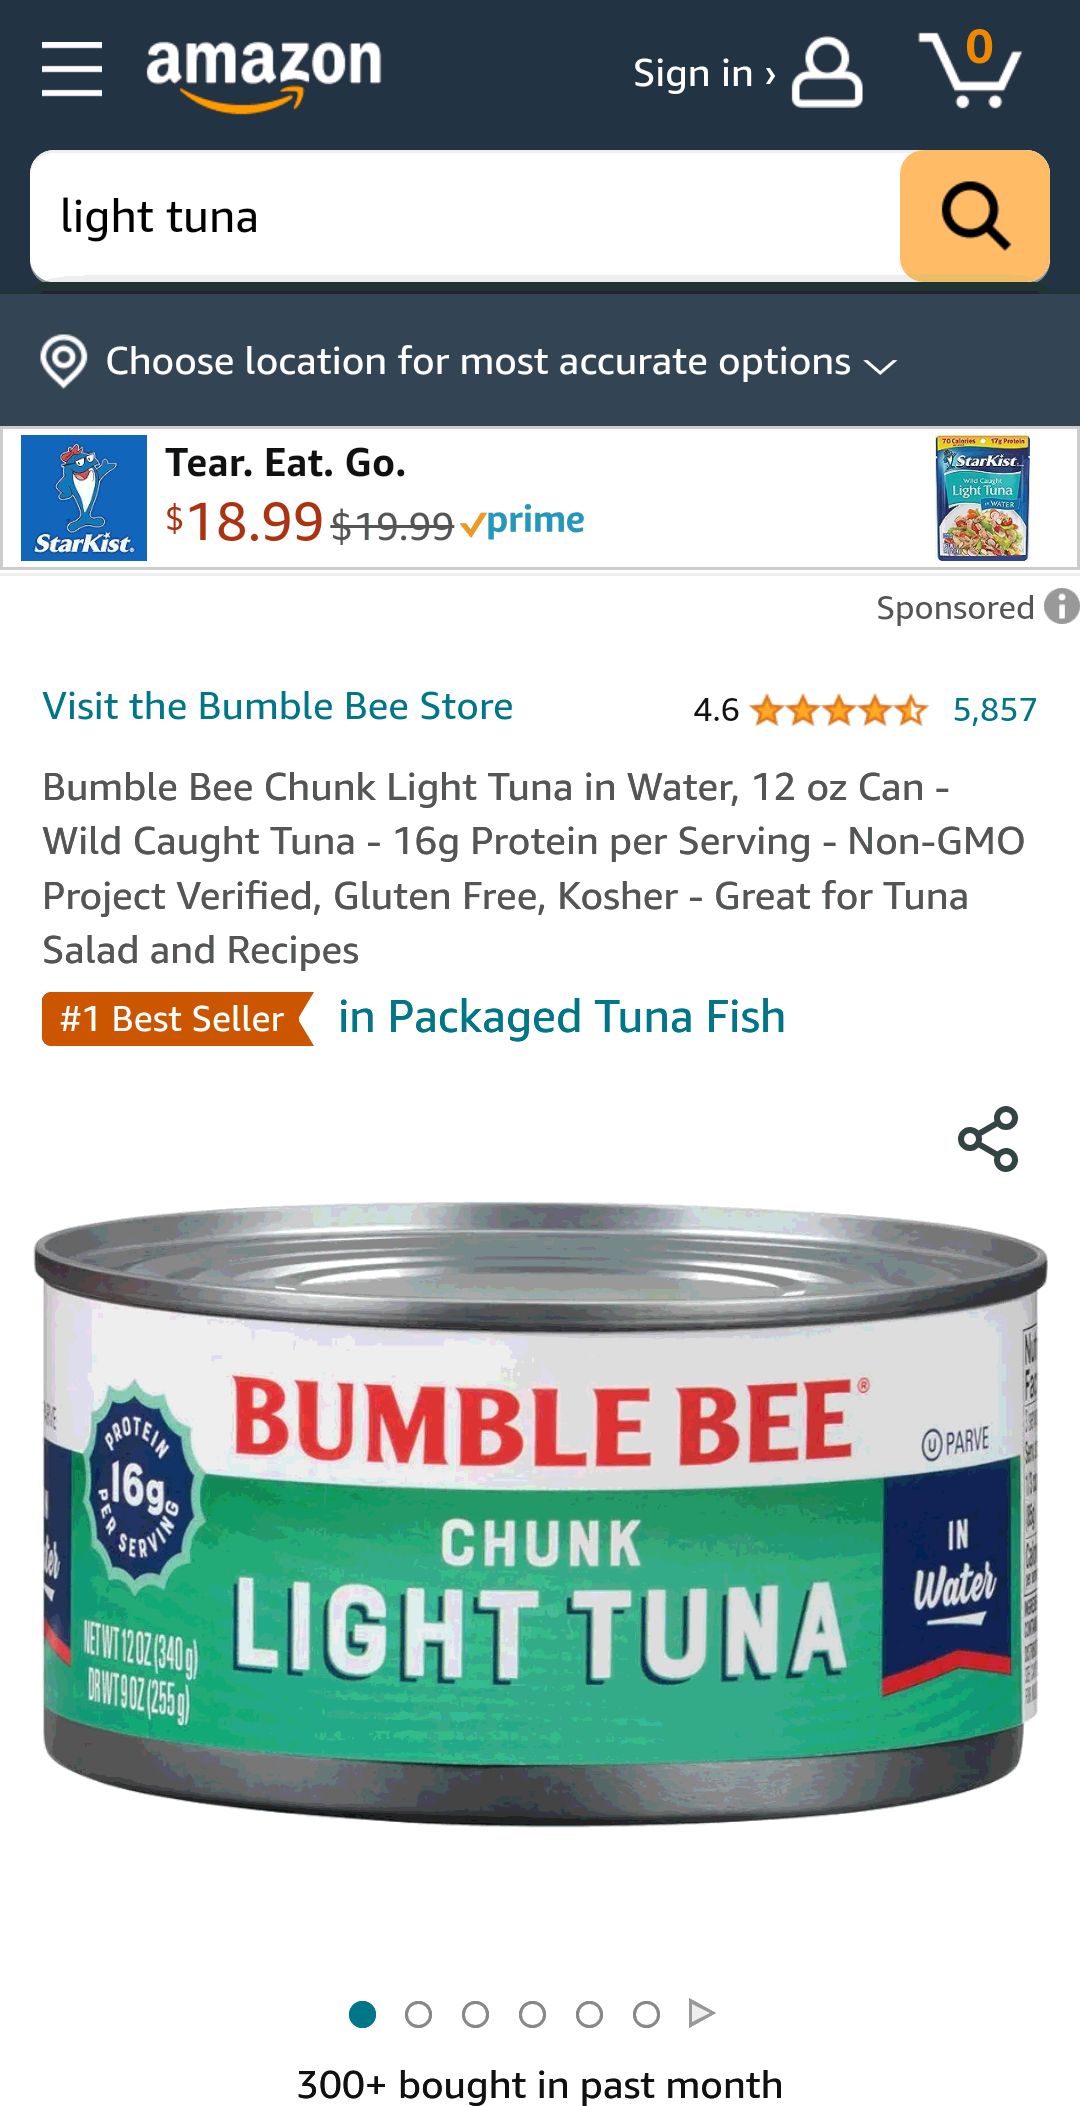 Amazon.com : Bumble Bee Chunk Light Tuna in Water, 12 oz Can - Wild Caught Tuna - 16g Protein per Serving - Non-GMO Project Verified, Gluten Free, Kosher - Great for Tuna Salad and Recipes : Everythin